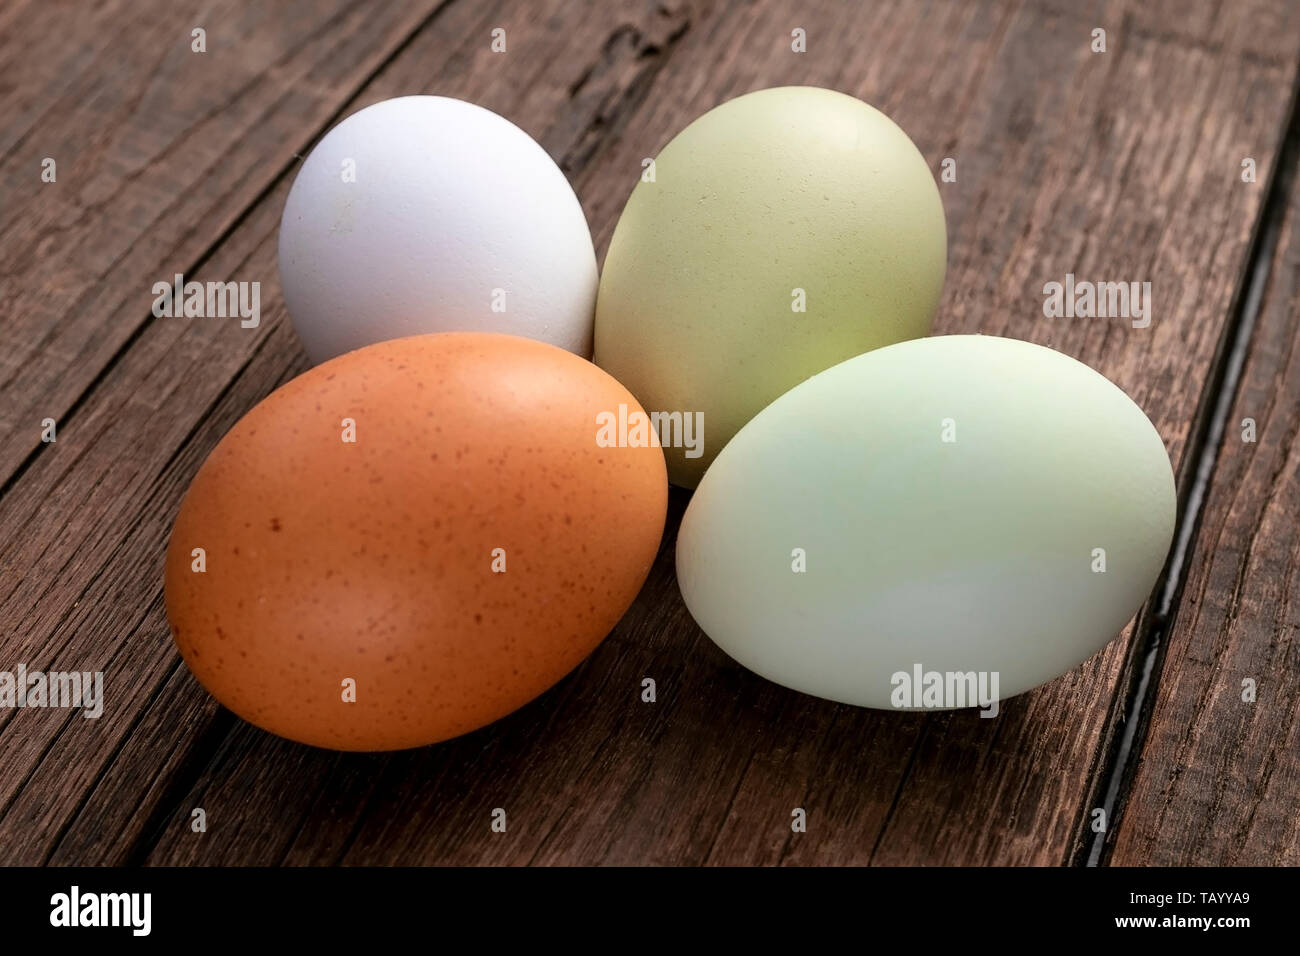 Fresh eggs of several chicken breeds Stock Photo